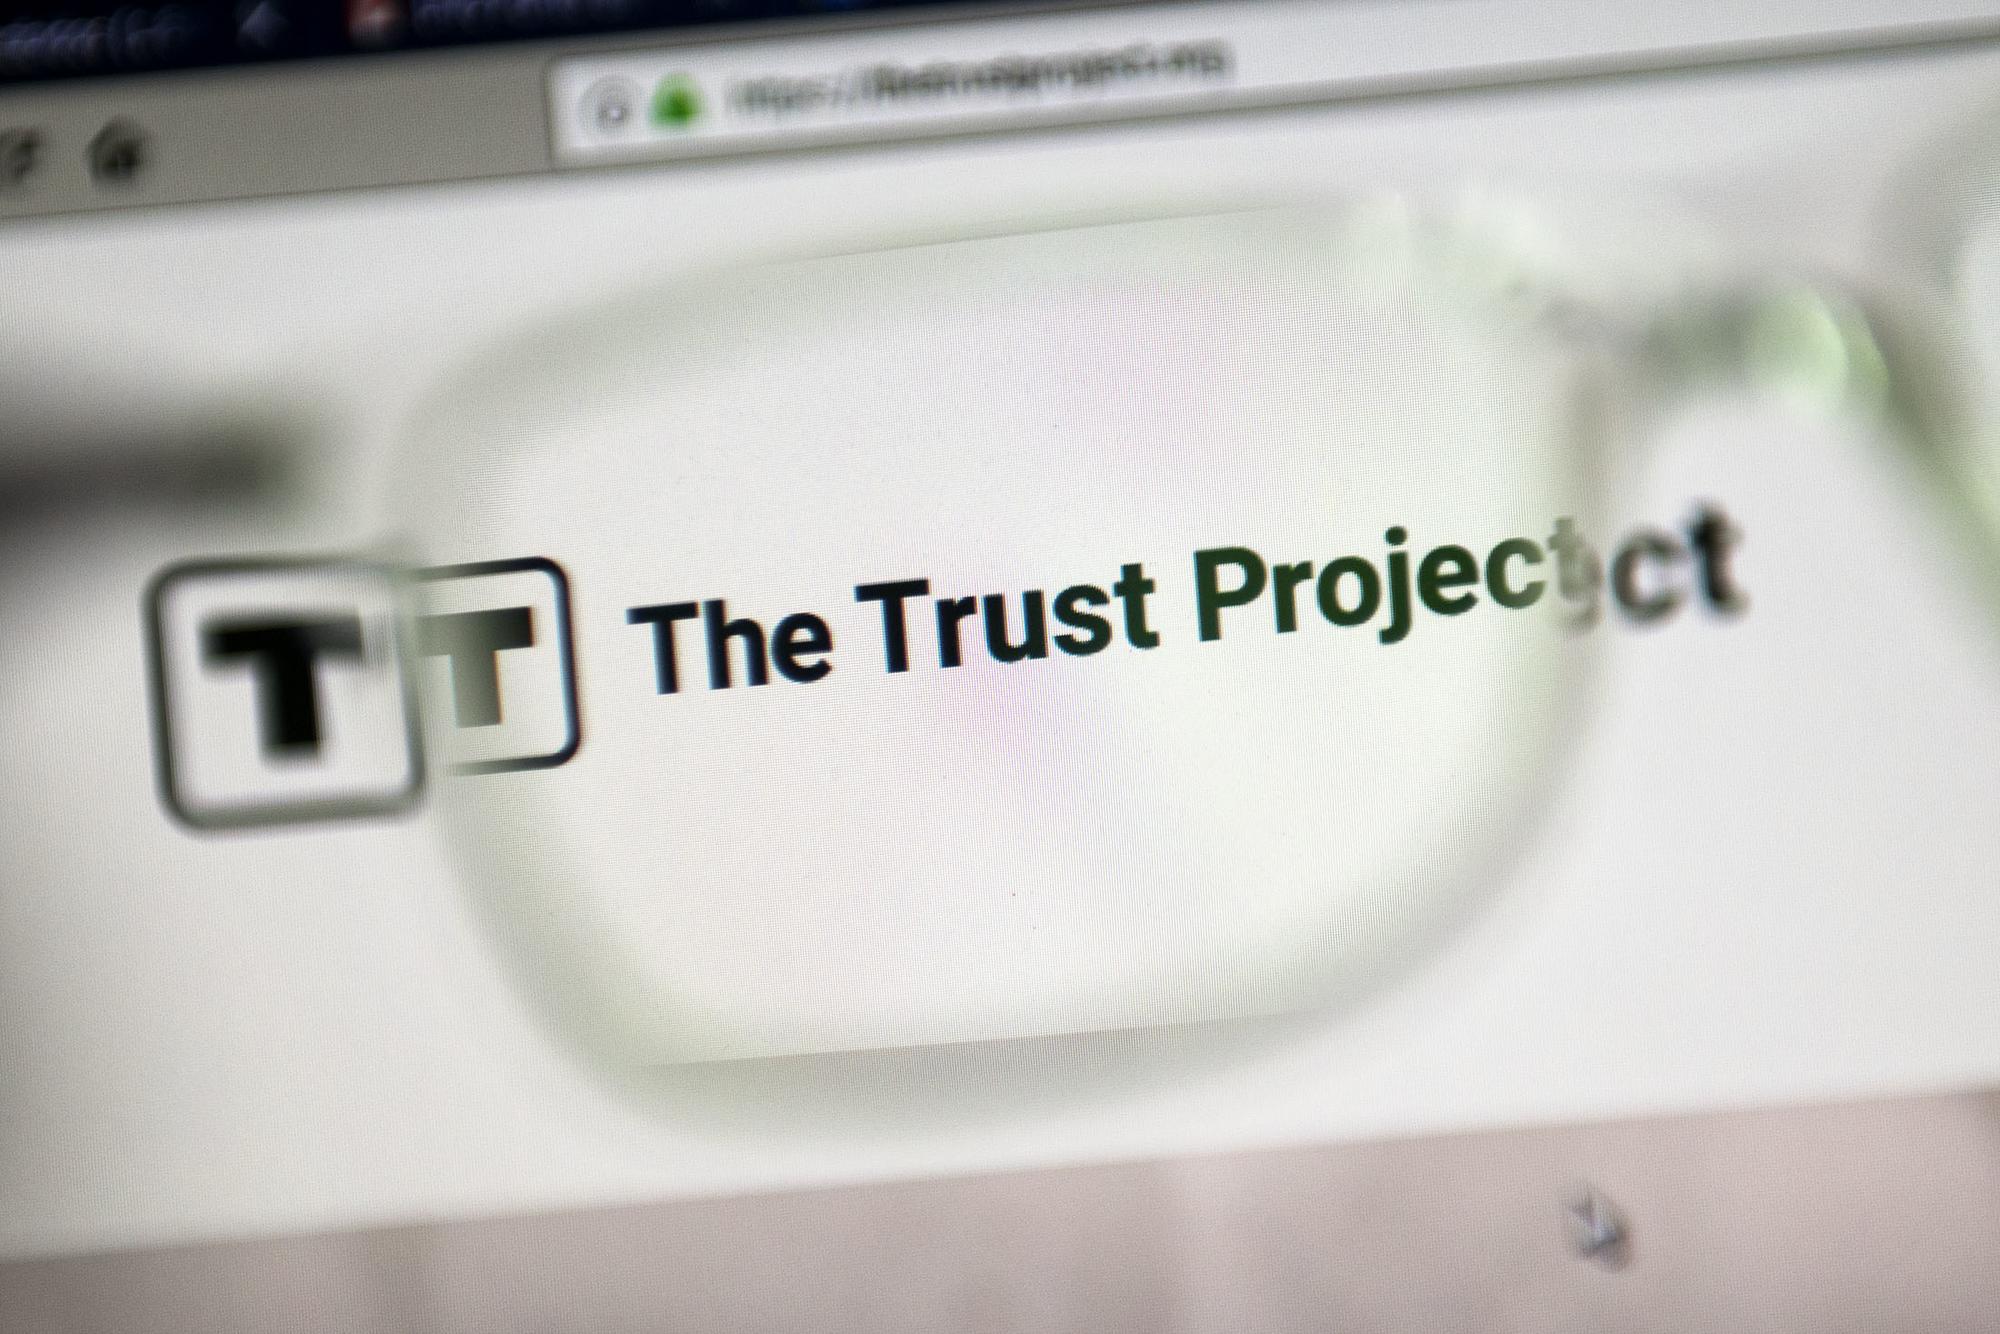  The Trust Project